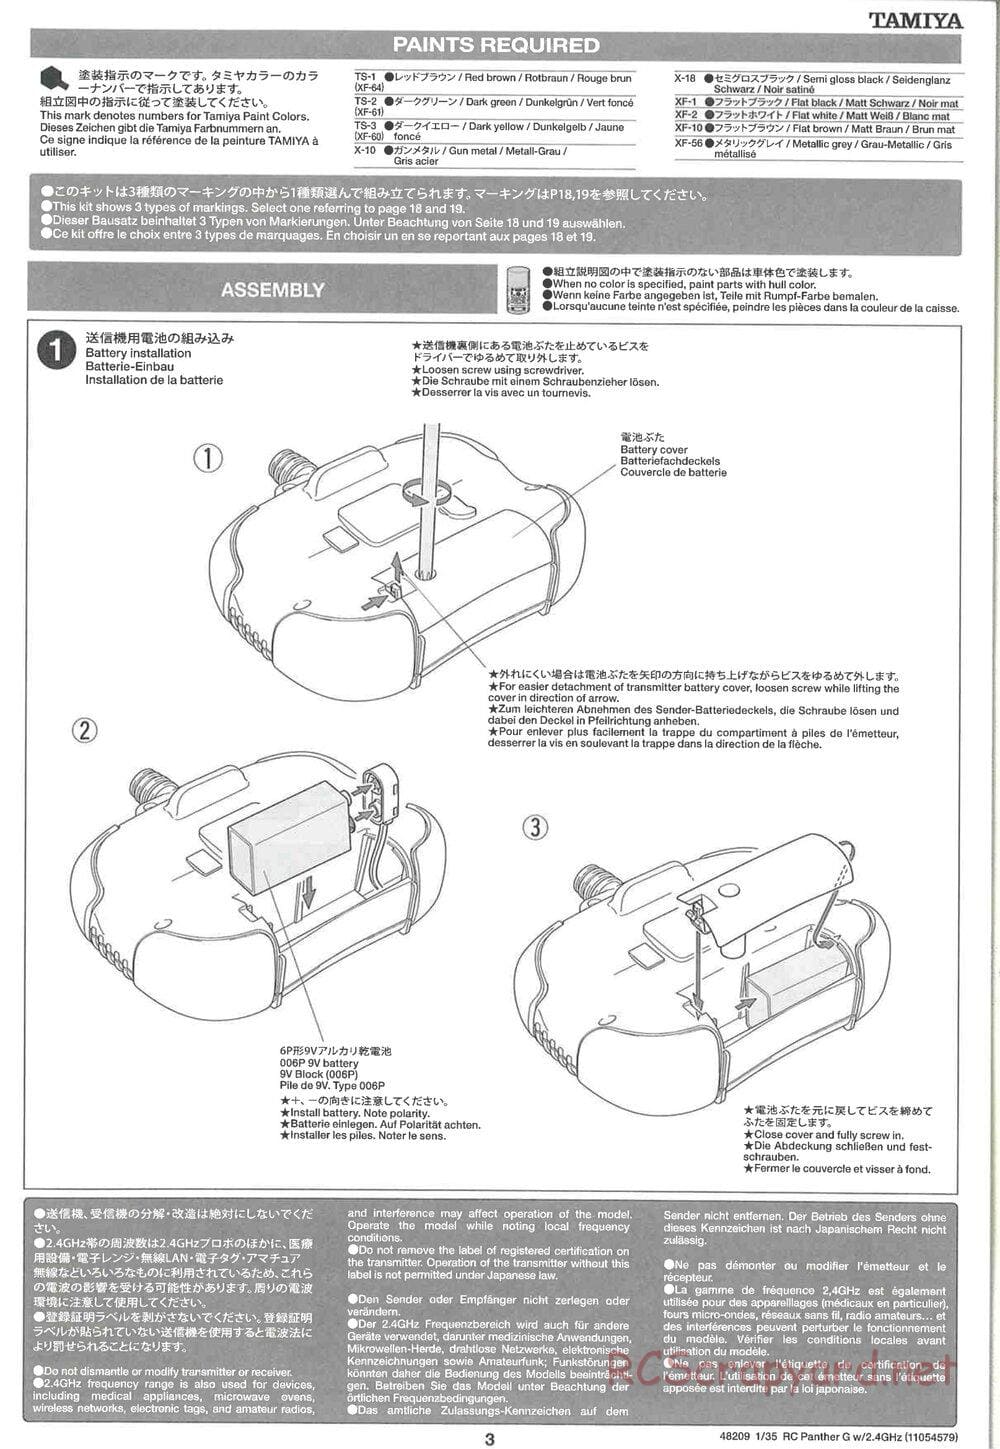 Tamiya - German Panther Type G - Late Version - 1/35 Scale Chassis - Manual - Page 3